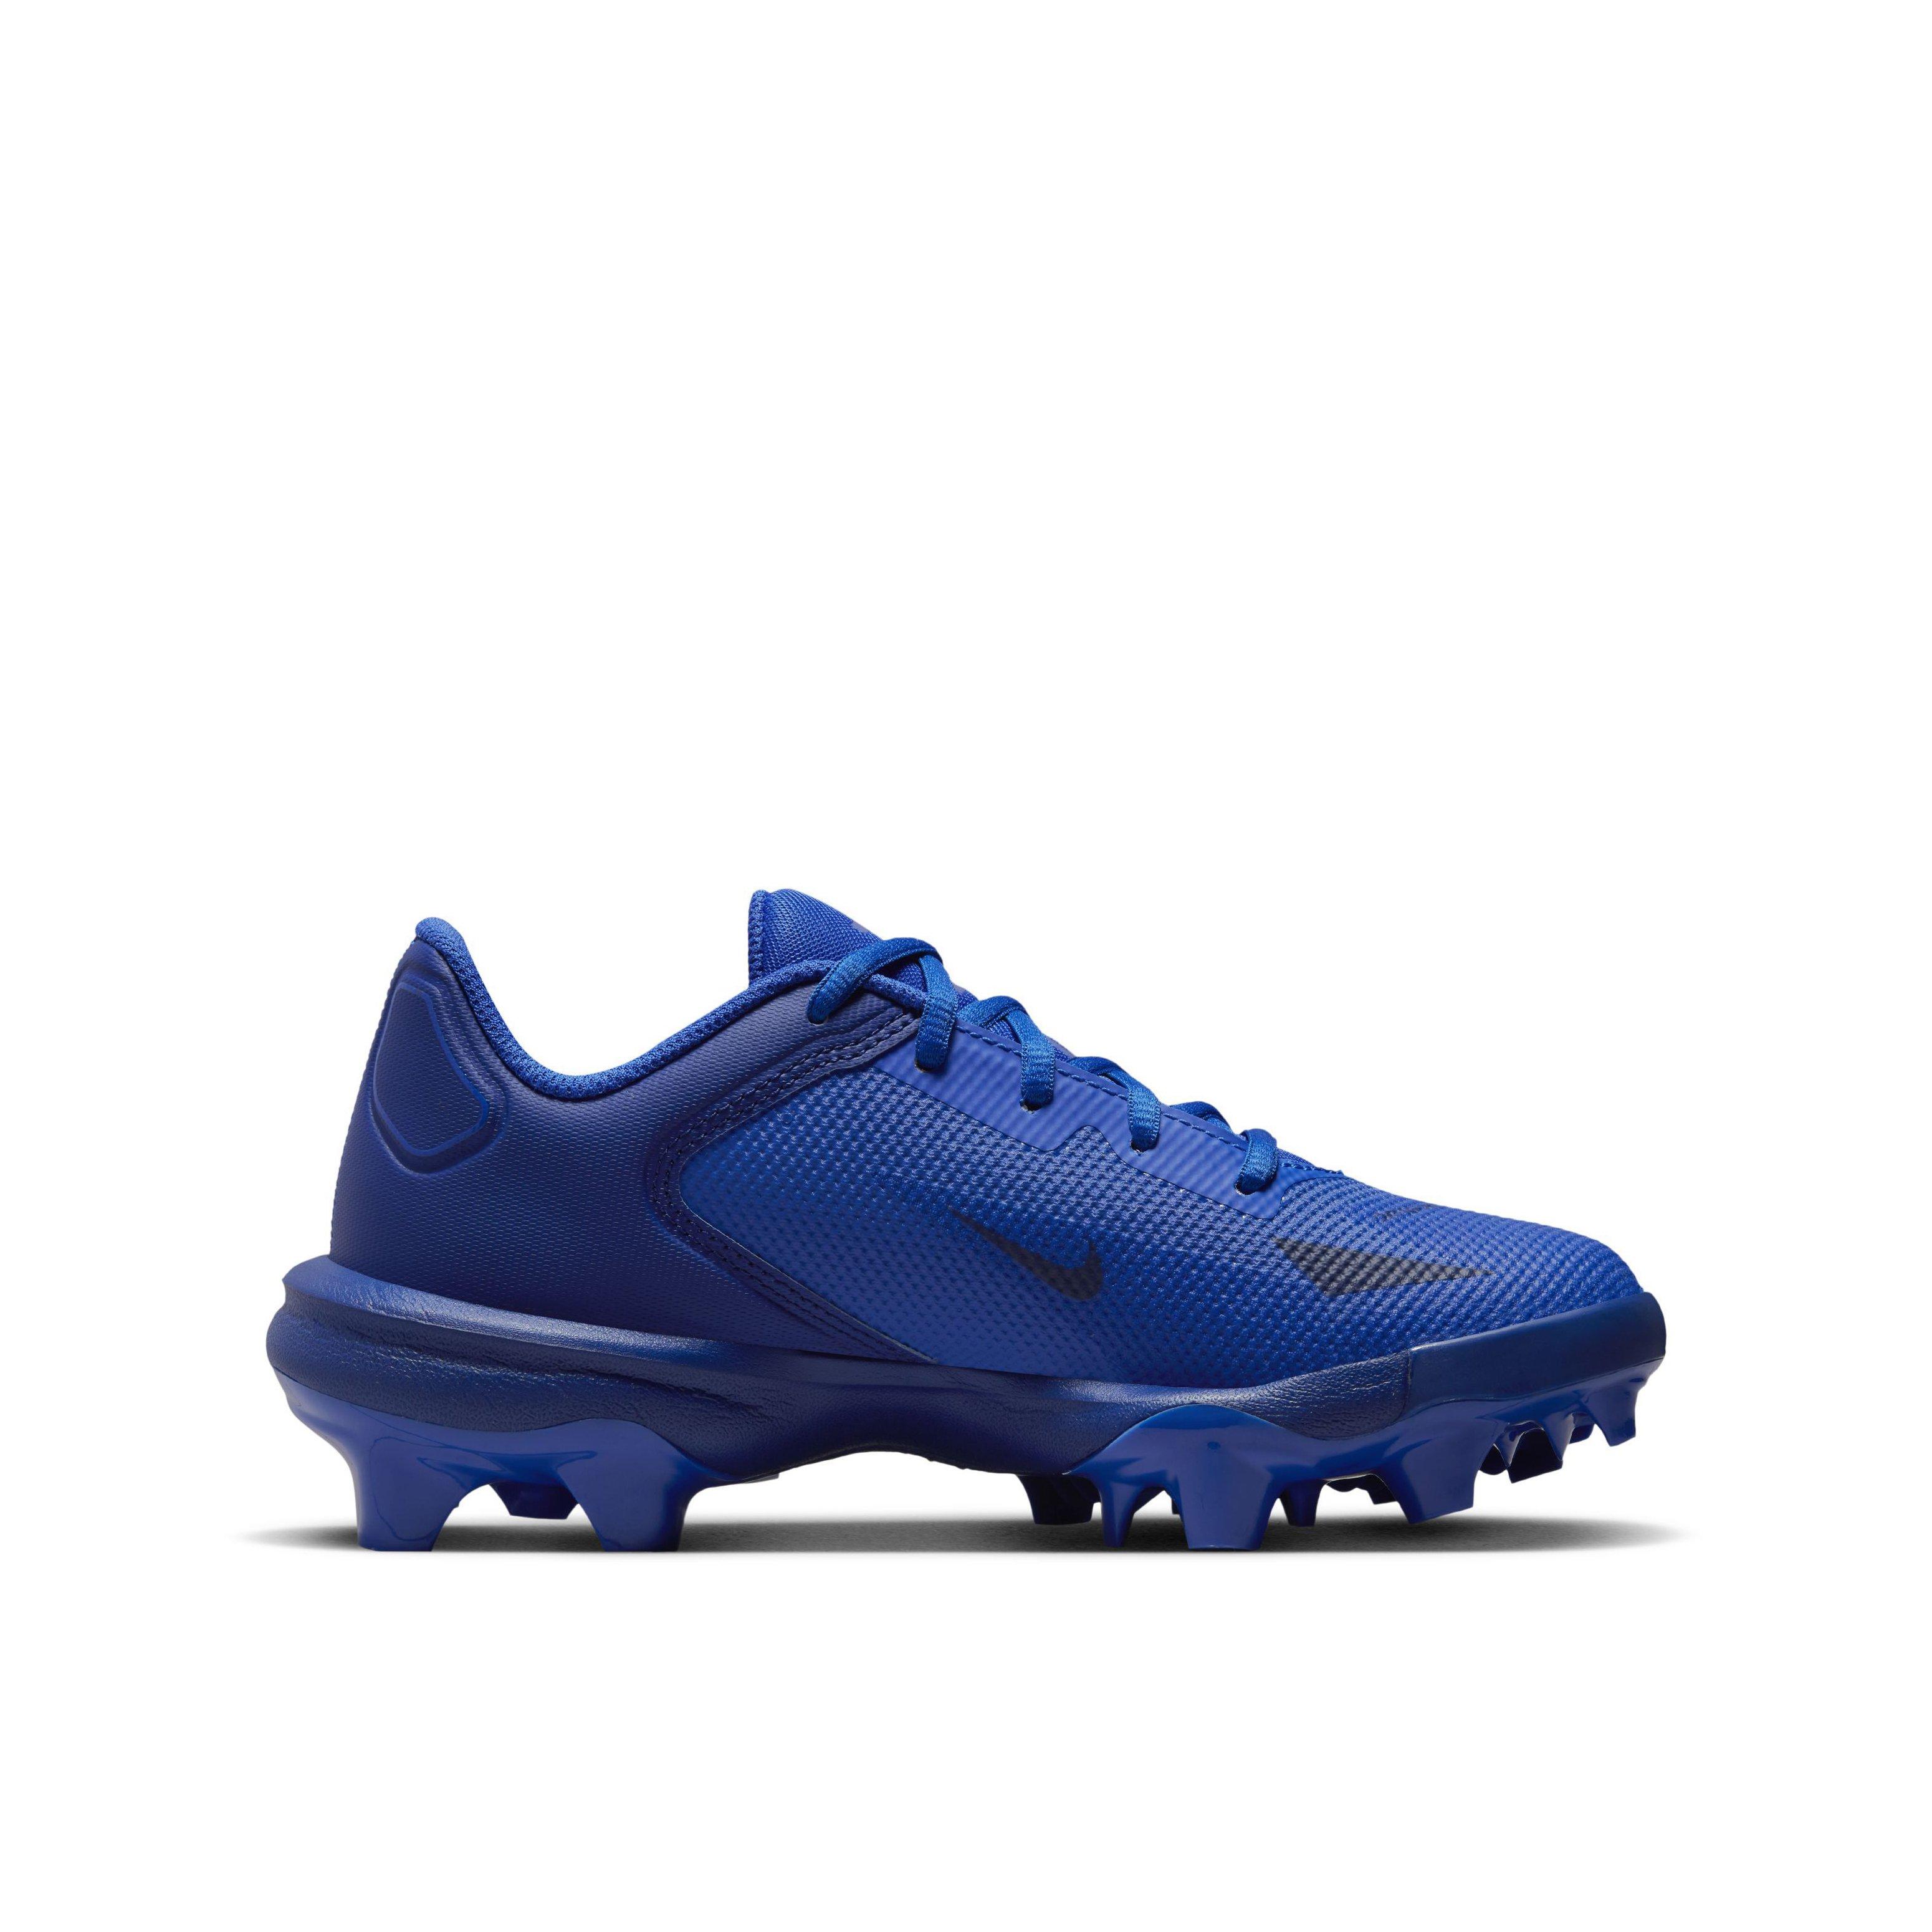 Blue/White Nike Trout cleats Size 1.5 (Y)